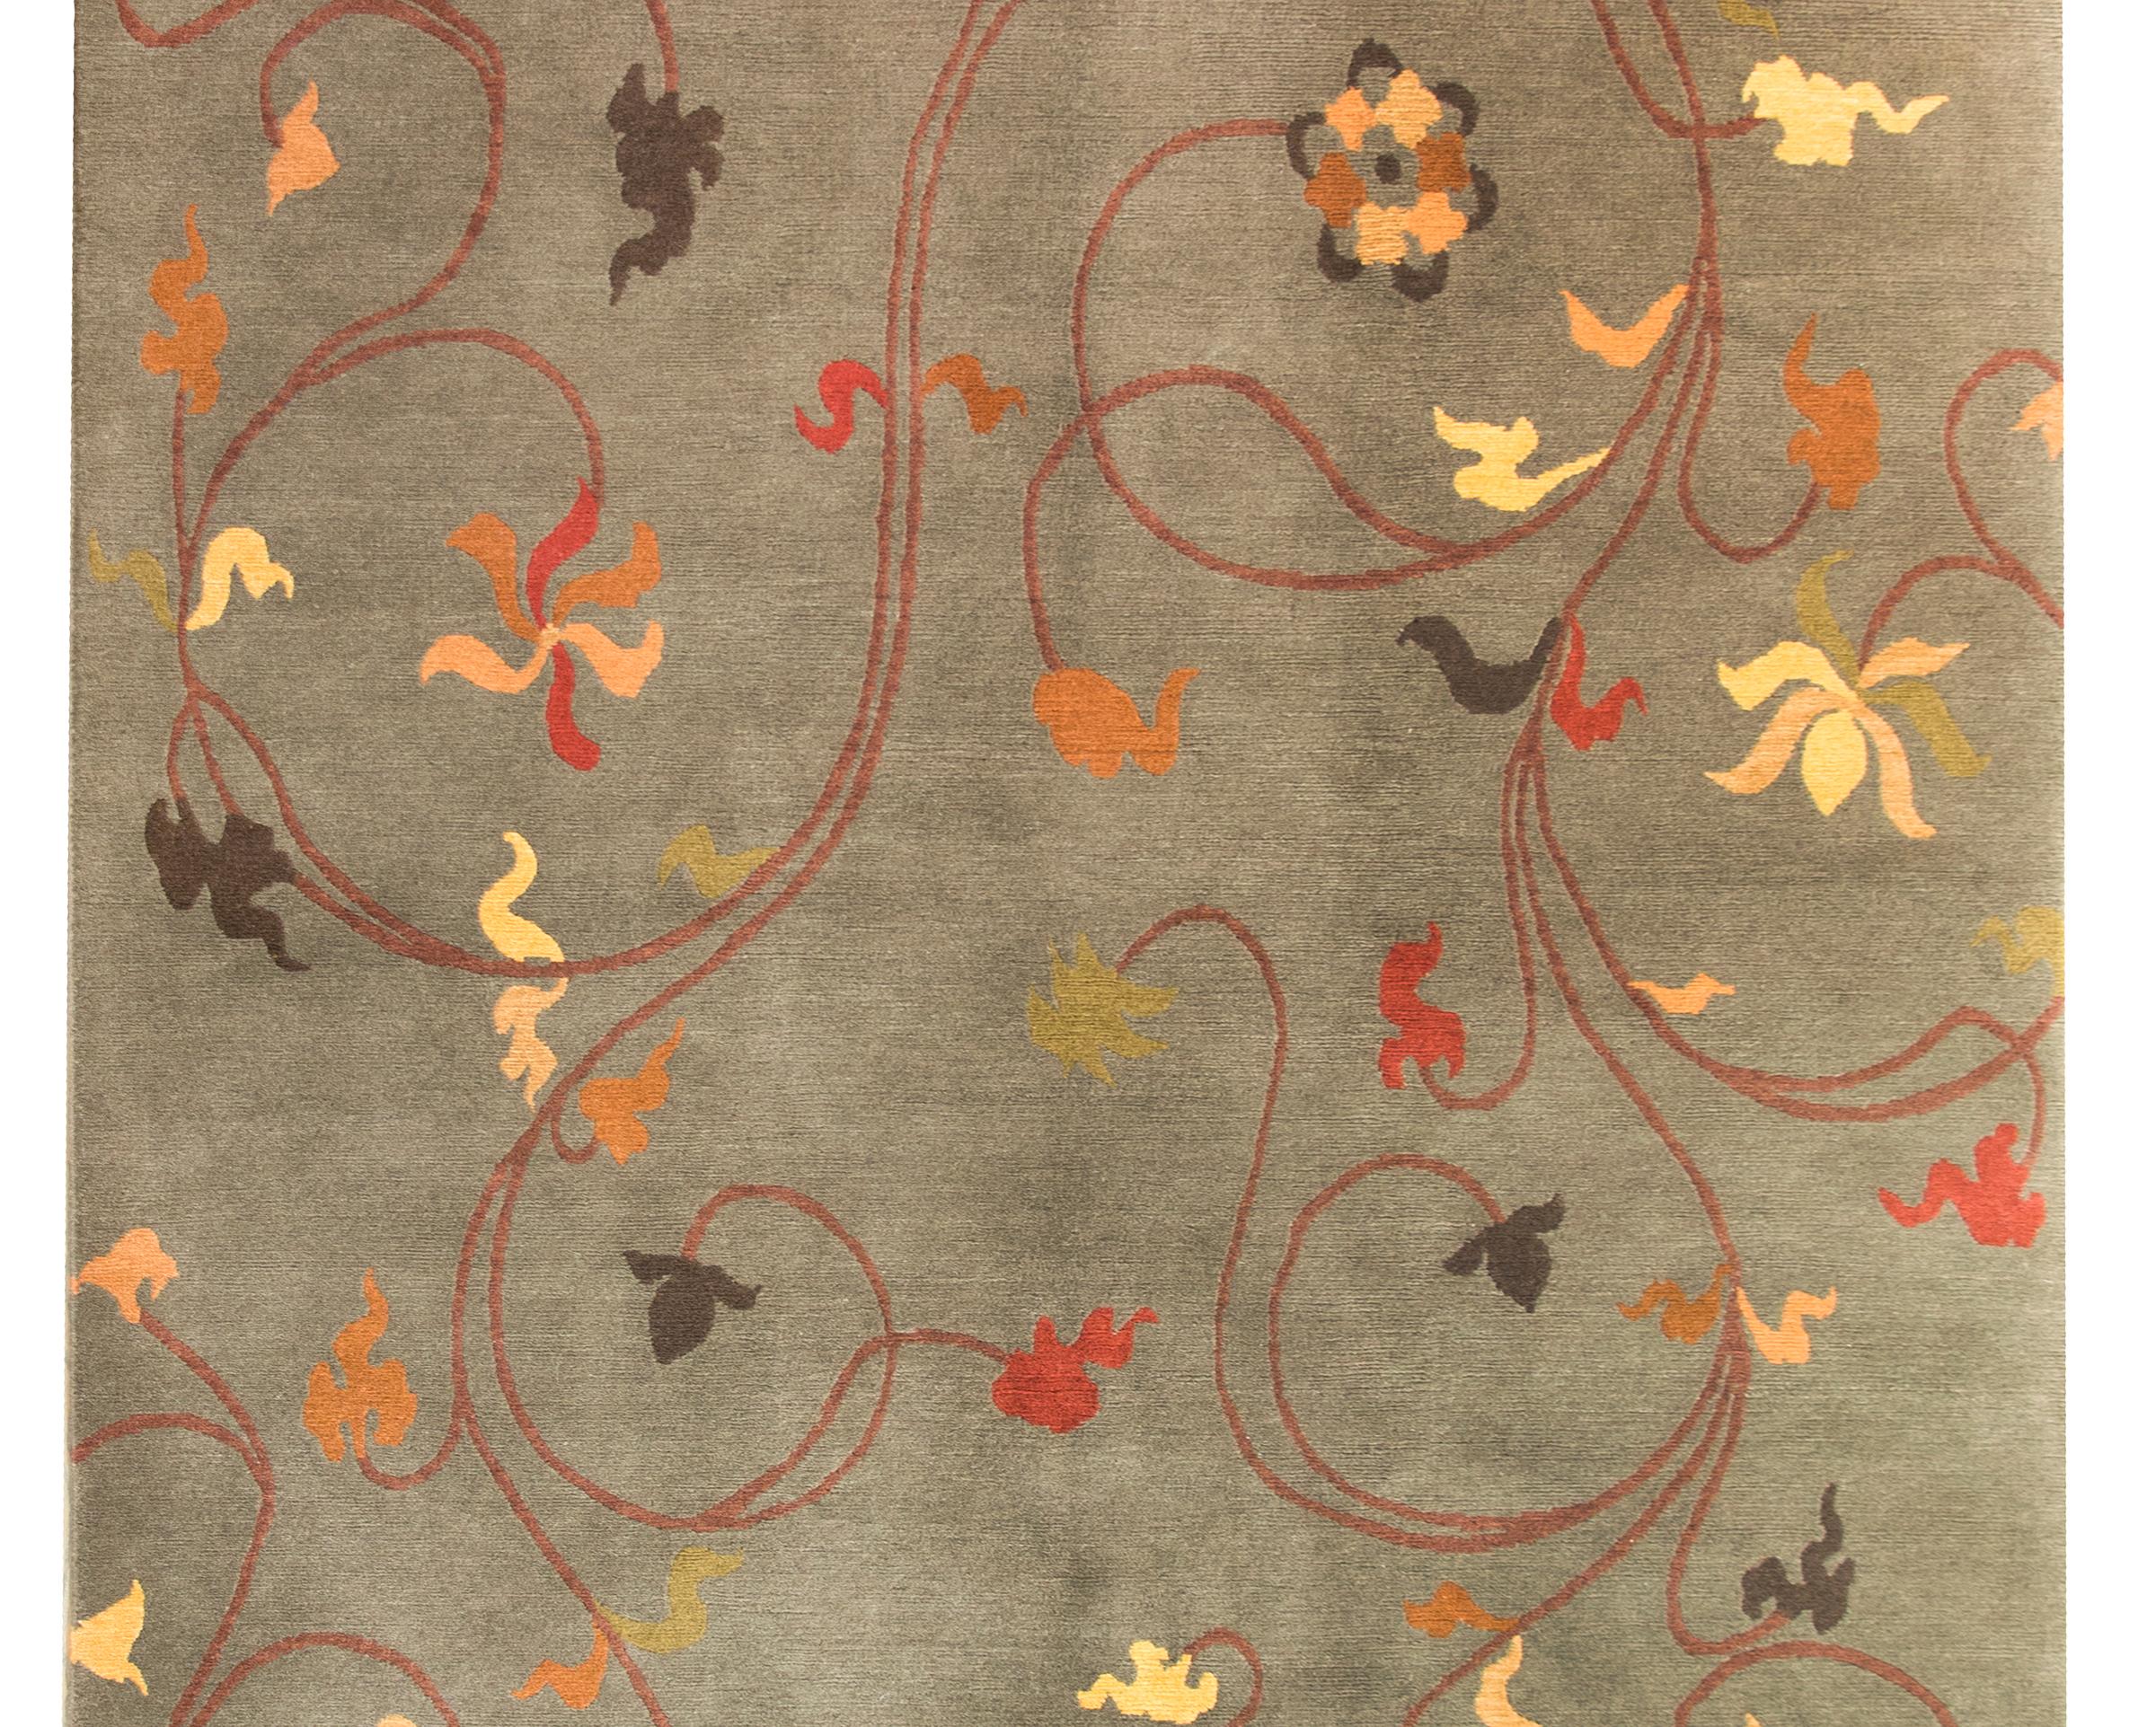 A chic late 20th century Tibetan hand-knotted rug with a gray background and an all-over scrolling vine and stylized flower pattern woven in crimson, pink, cream, orange, and dark gray colors.